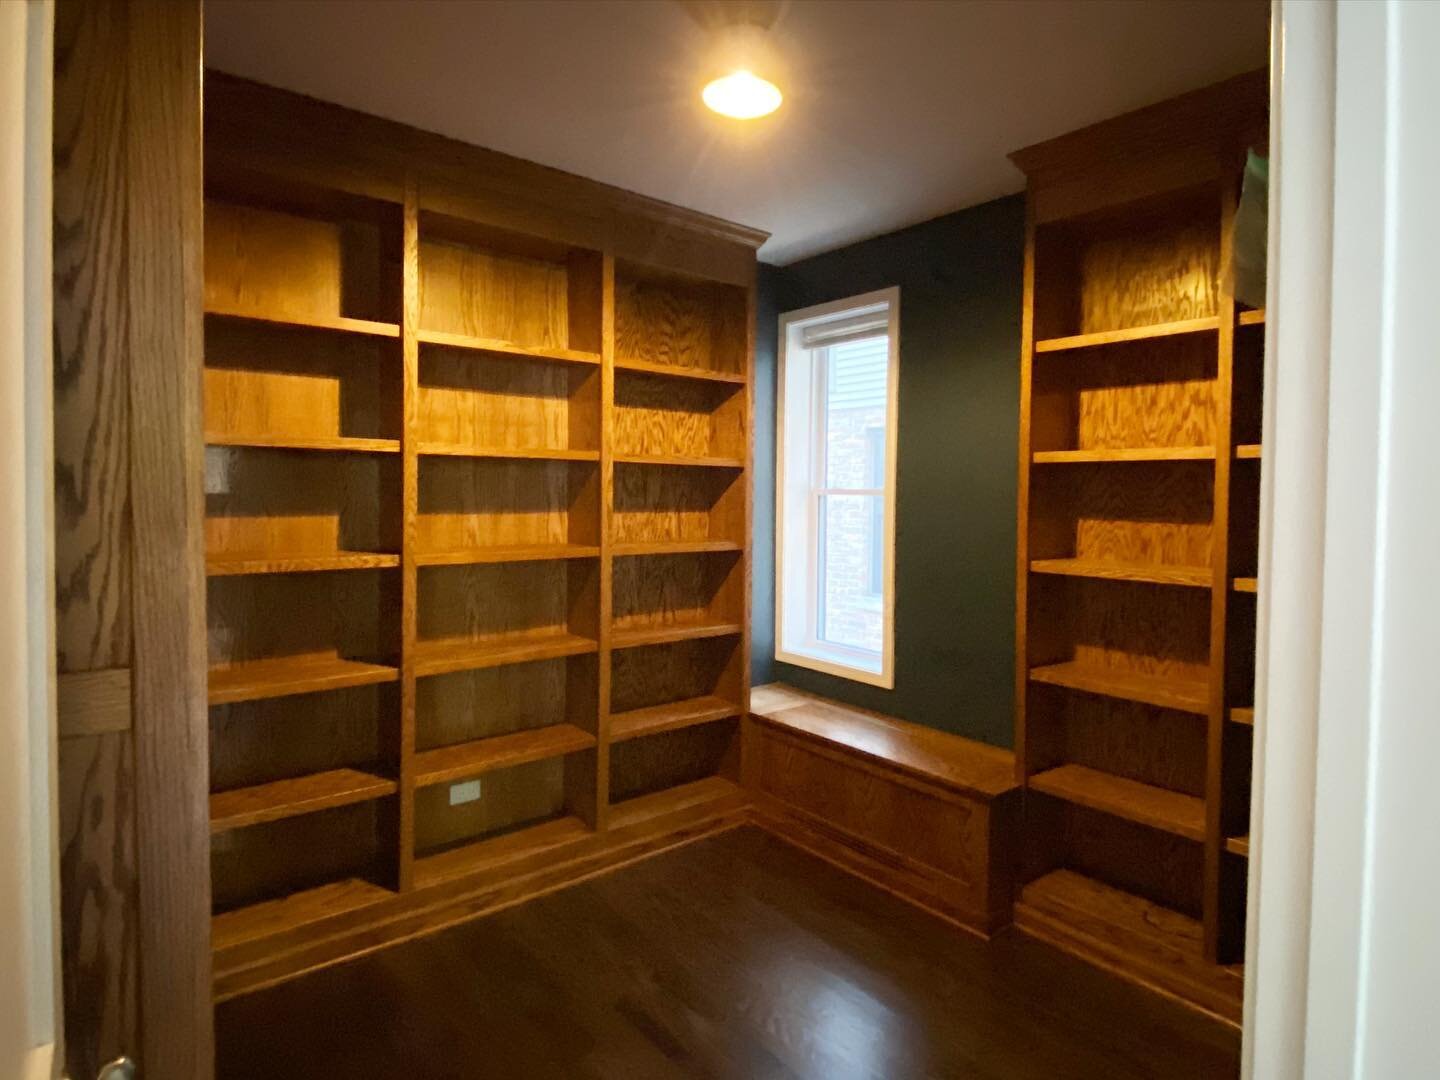 Just can&rsquo;t get enough of the custom wraparound shelving with storage bench / reading nook in this home office. The warm honey-toned finish really lets the natural beauty of the red oak shine through.

#custommade #customcarpentry #customfurnitu